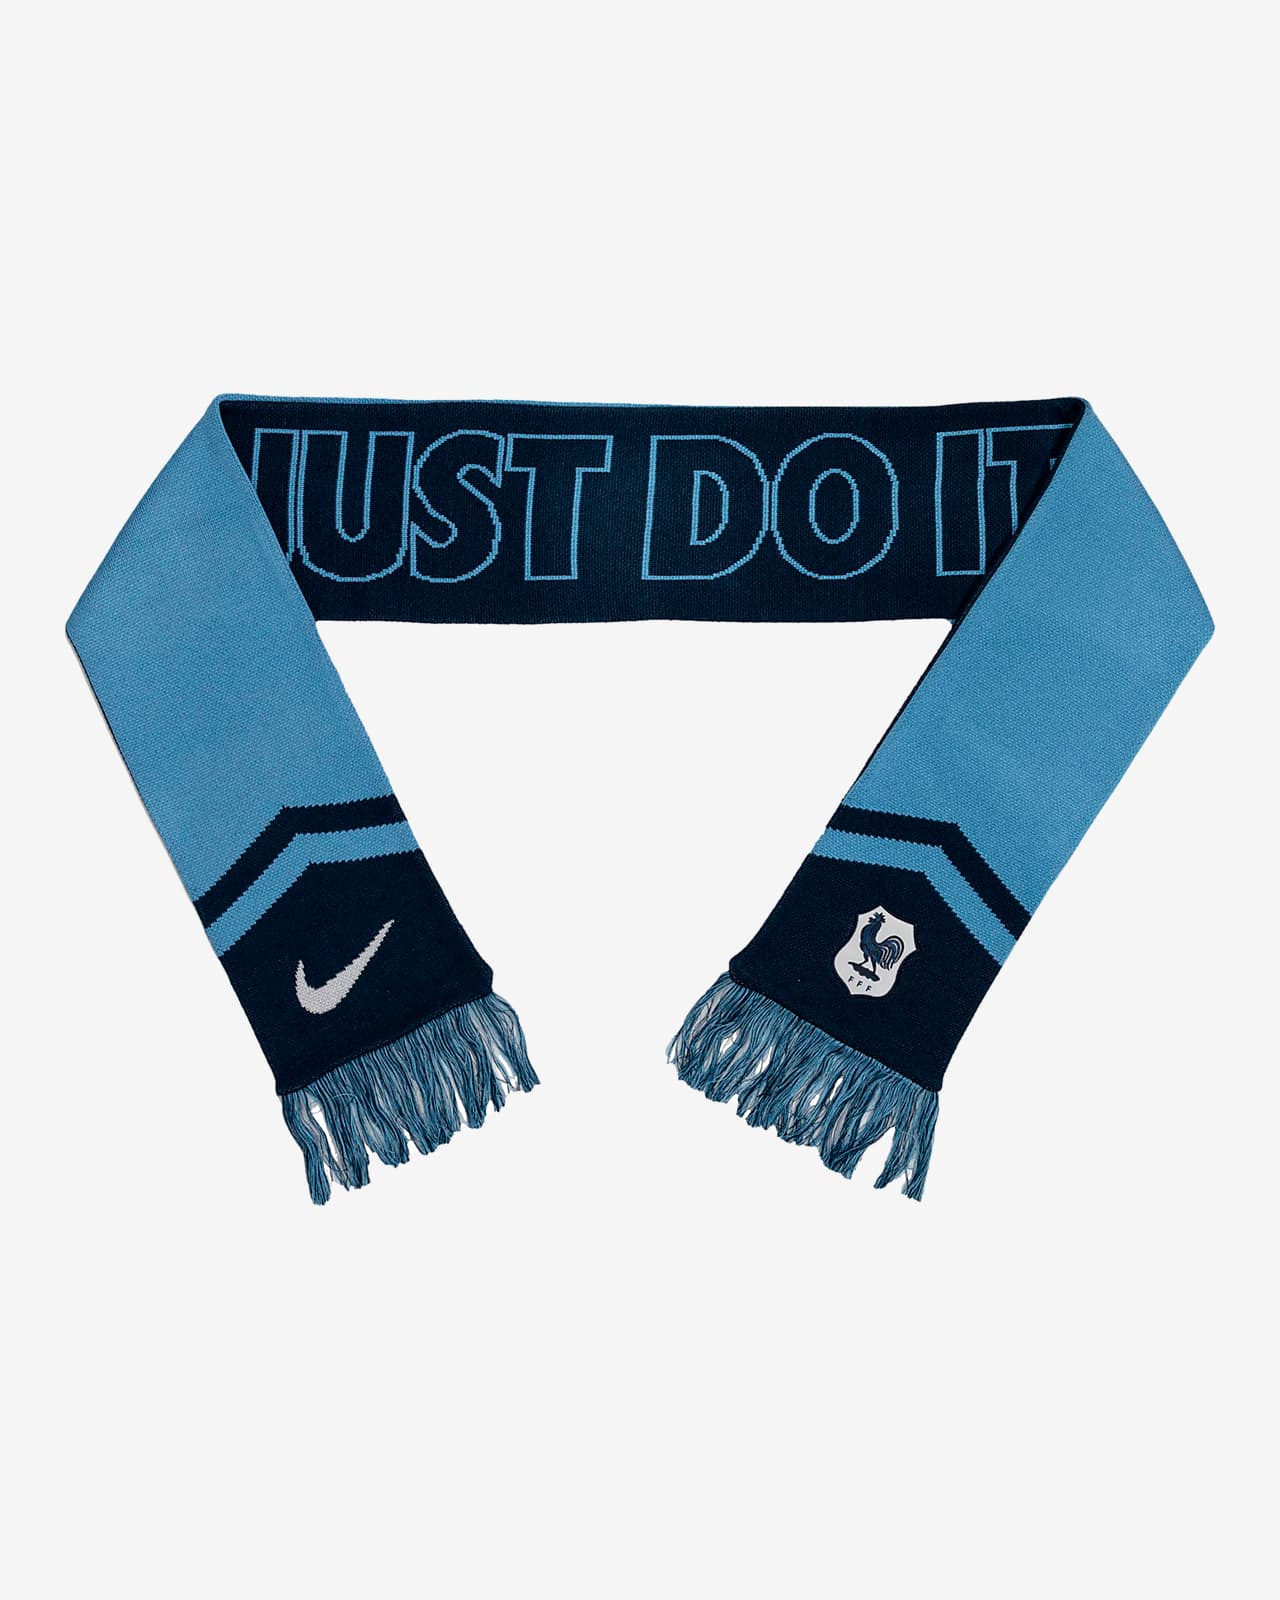 France National Team Local Verbiage Nike Soccer Scarf